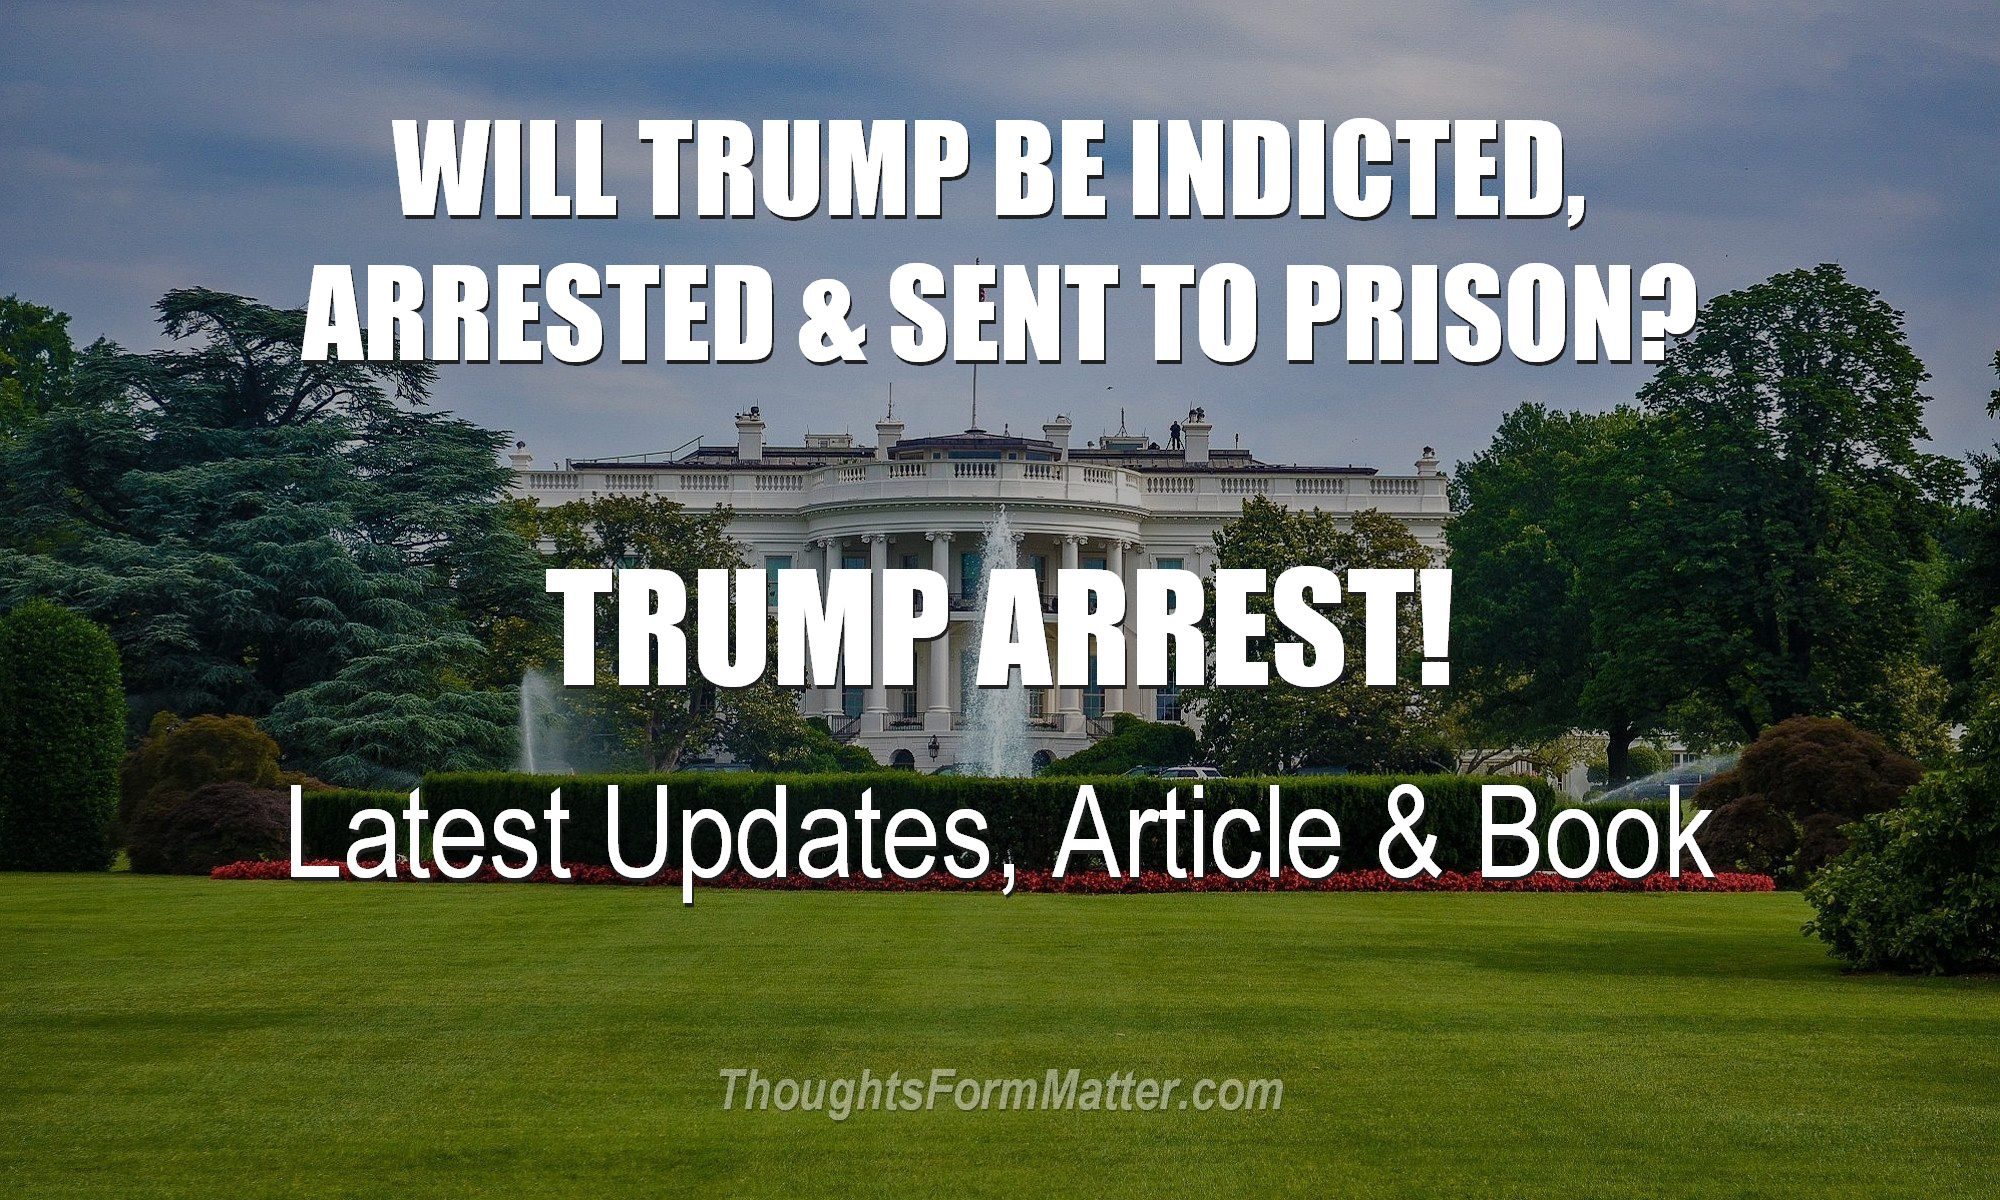 Capitol where it happened. Will Trump be indicted, arrested and sent to prison? Latest current updates, article and book.